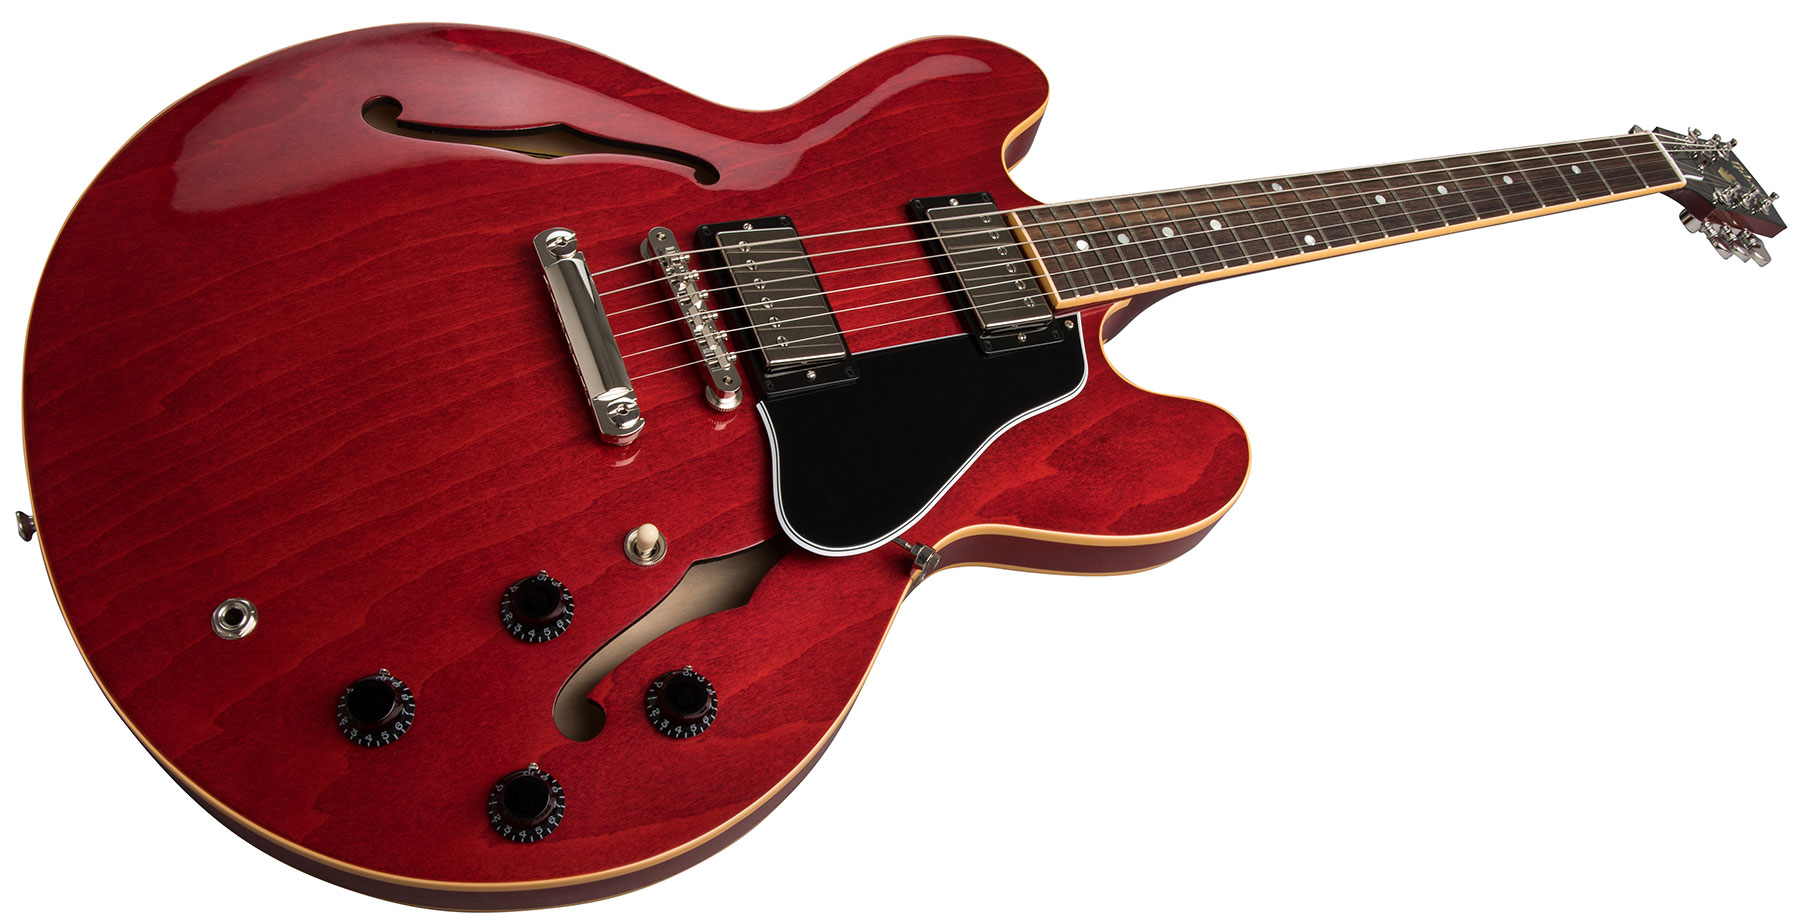 Gibson Es-335 Dot 2019 Hh Ht Rw - Antique Faded Cherry - Semi-hollow electric guitar - Variation 1